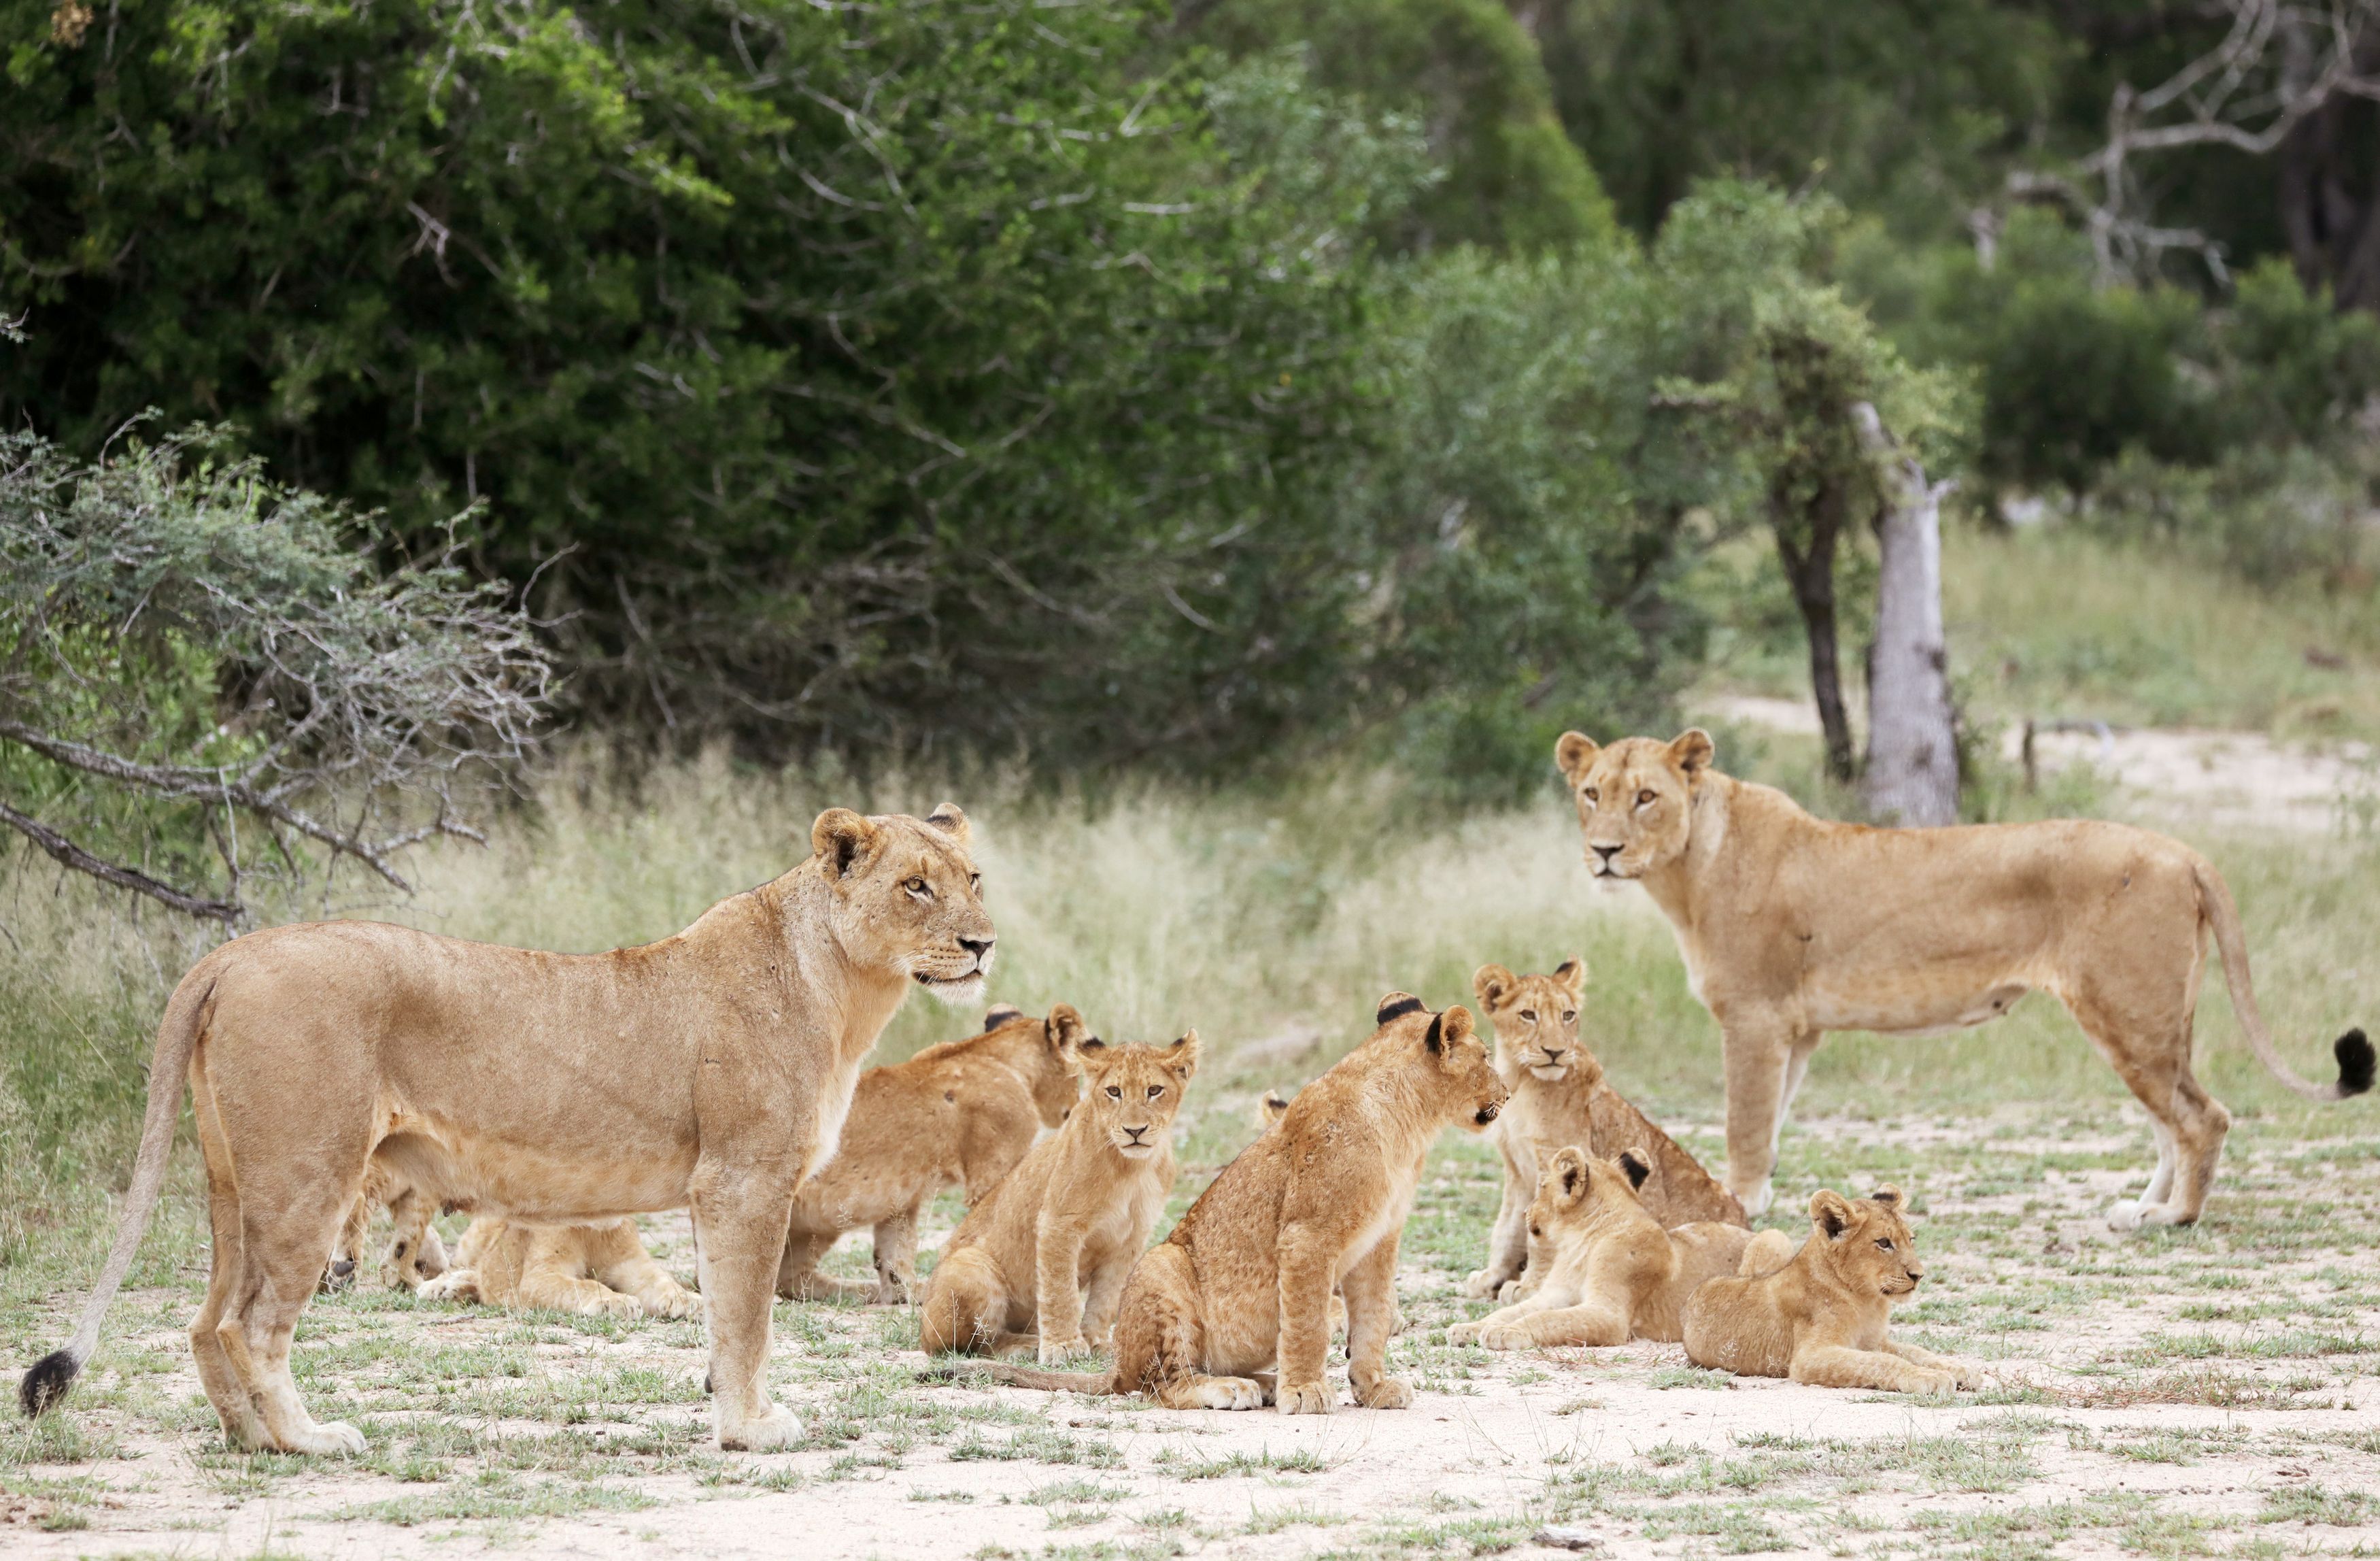 FILE PHOTO: A pride of lions is seen at a game reserve adjacent to the world-renowned Kruger National Park in Mpumalanga province, South Africa, April 12, 2019. Picture taken April 12, 2019. REUTERS/Siphiwe Sibeko/File Photo